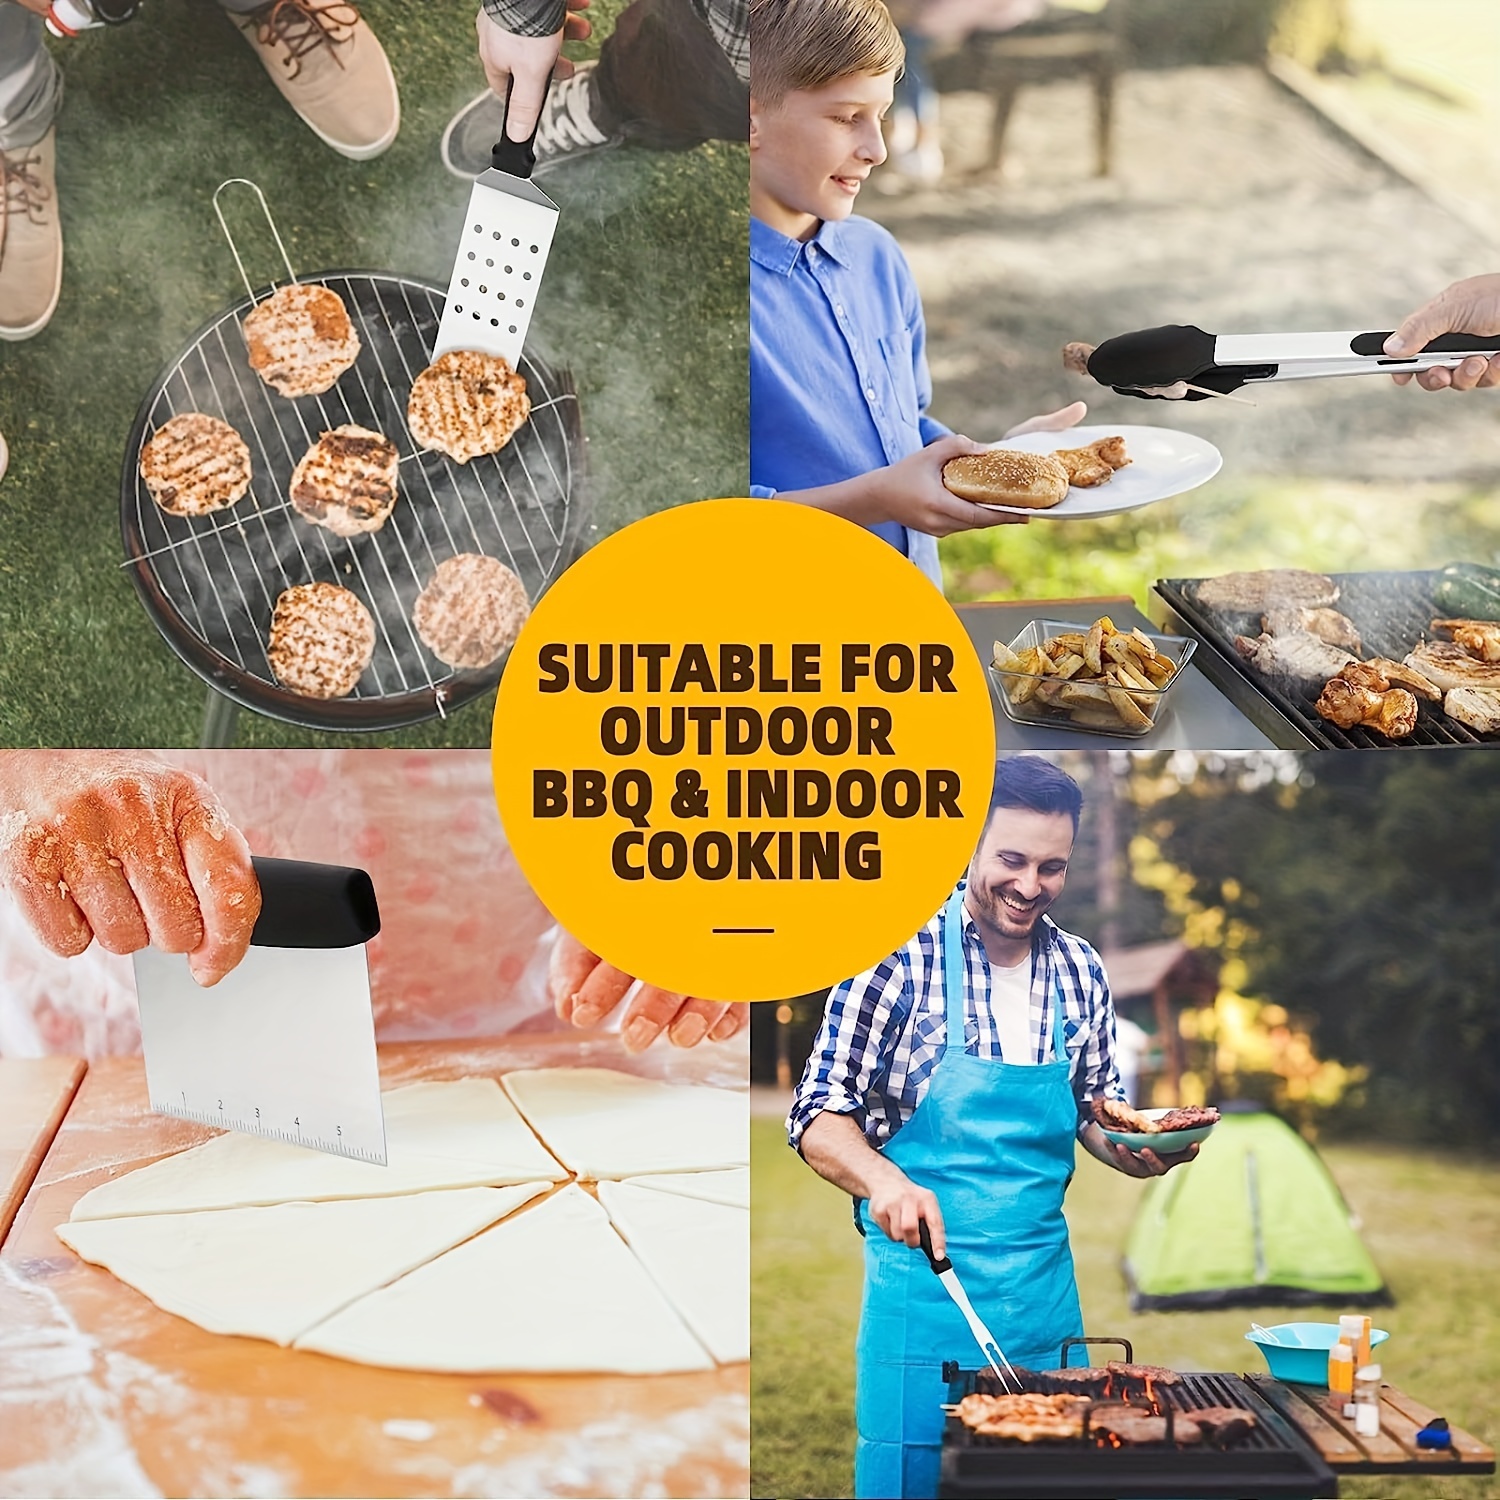  Commercial Chef Barbeque Grill Accessories for Outdoor